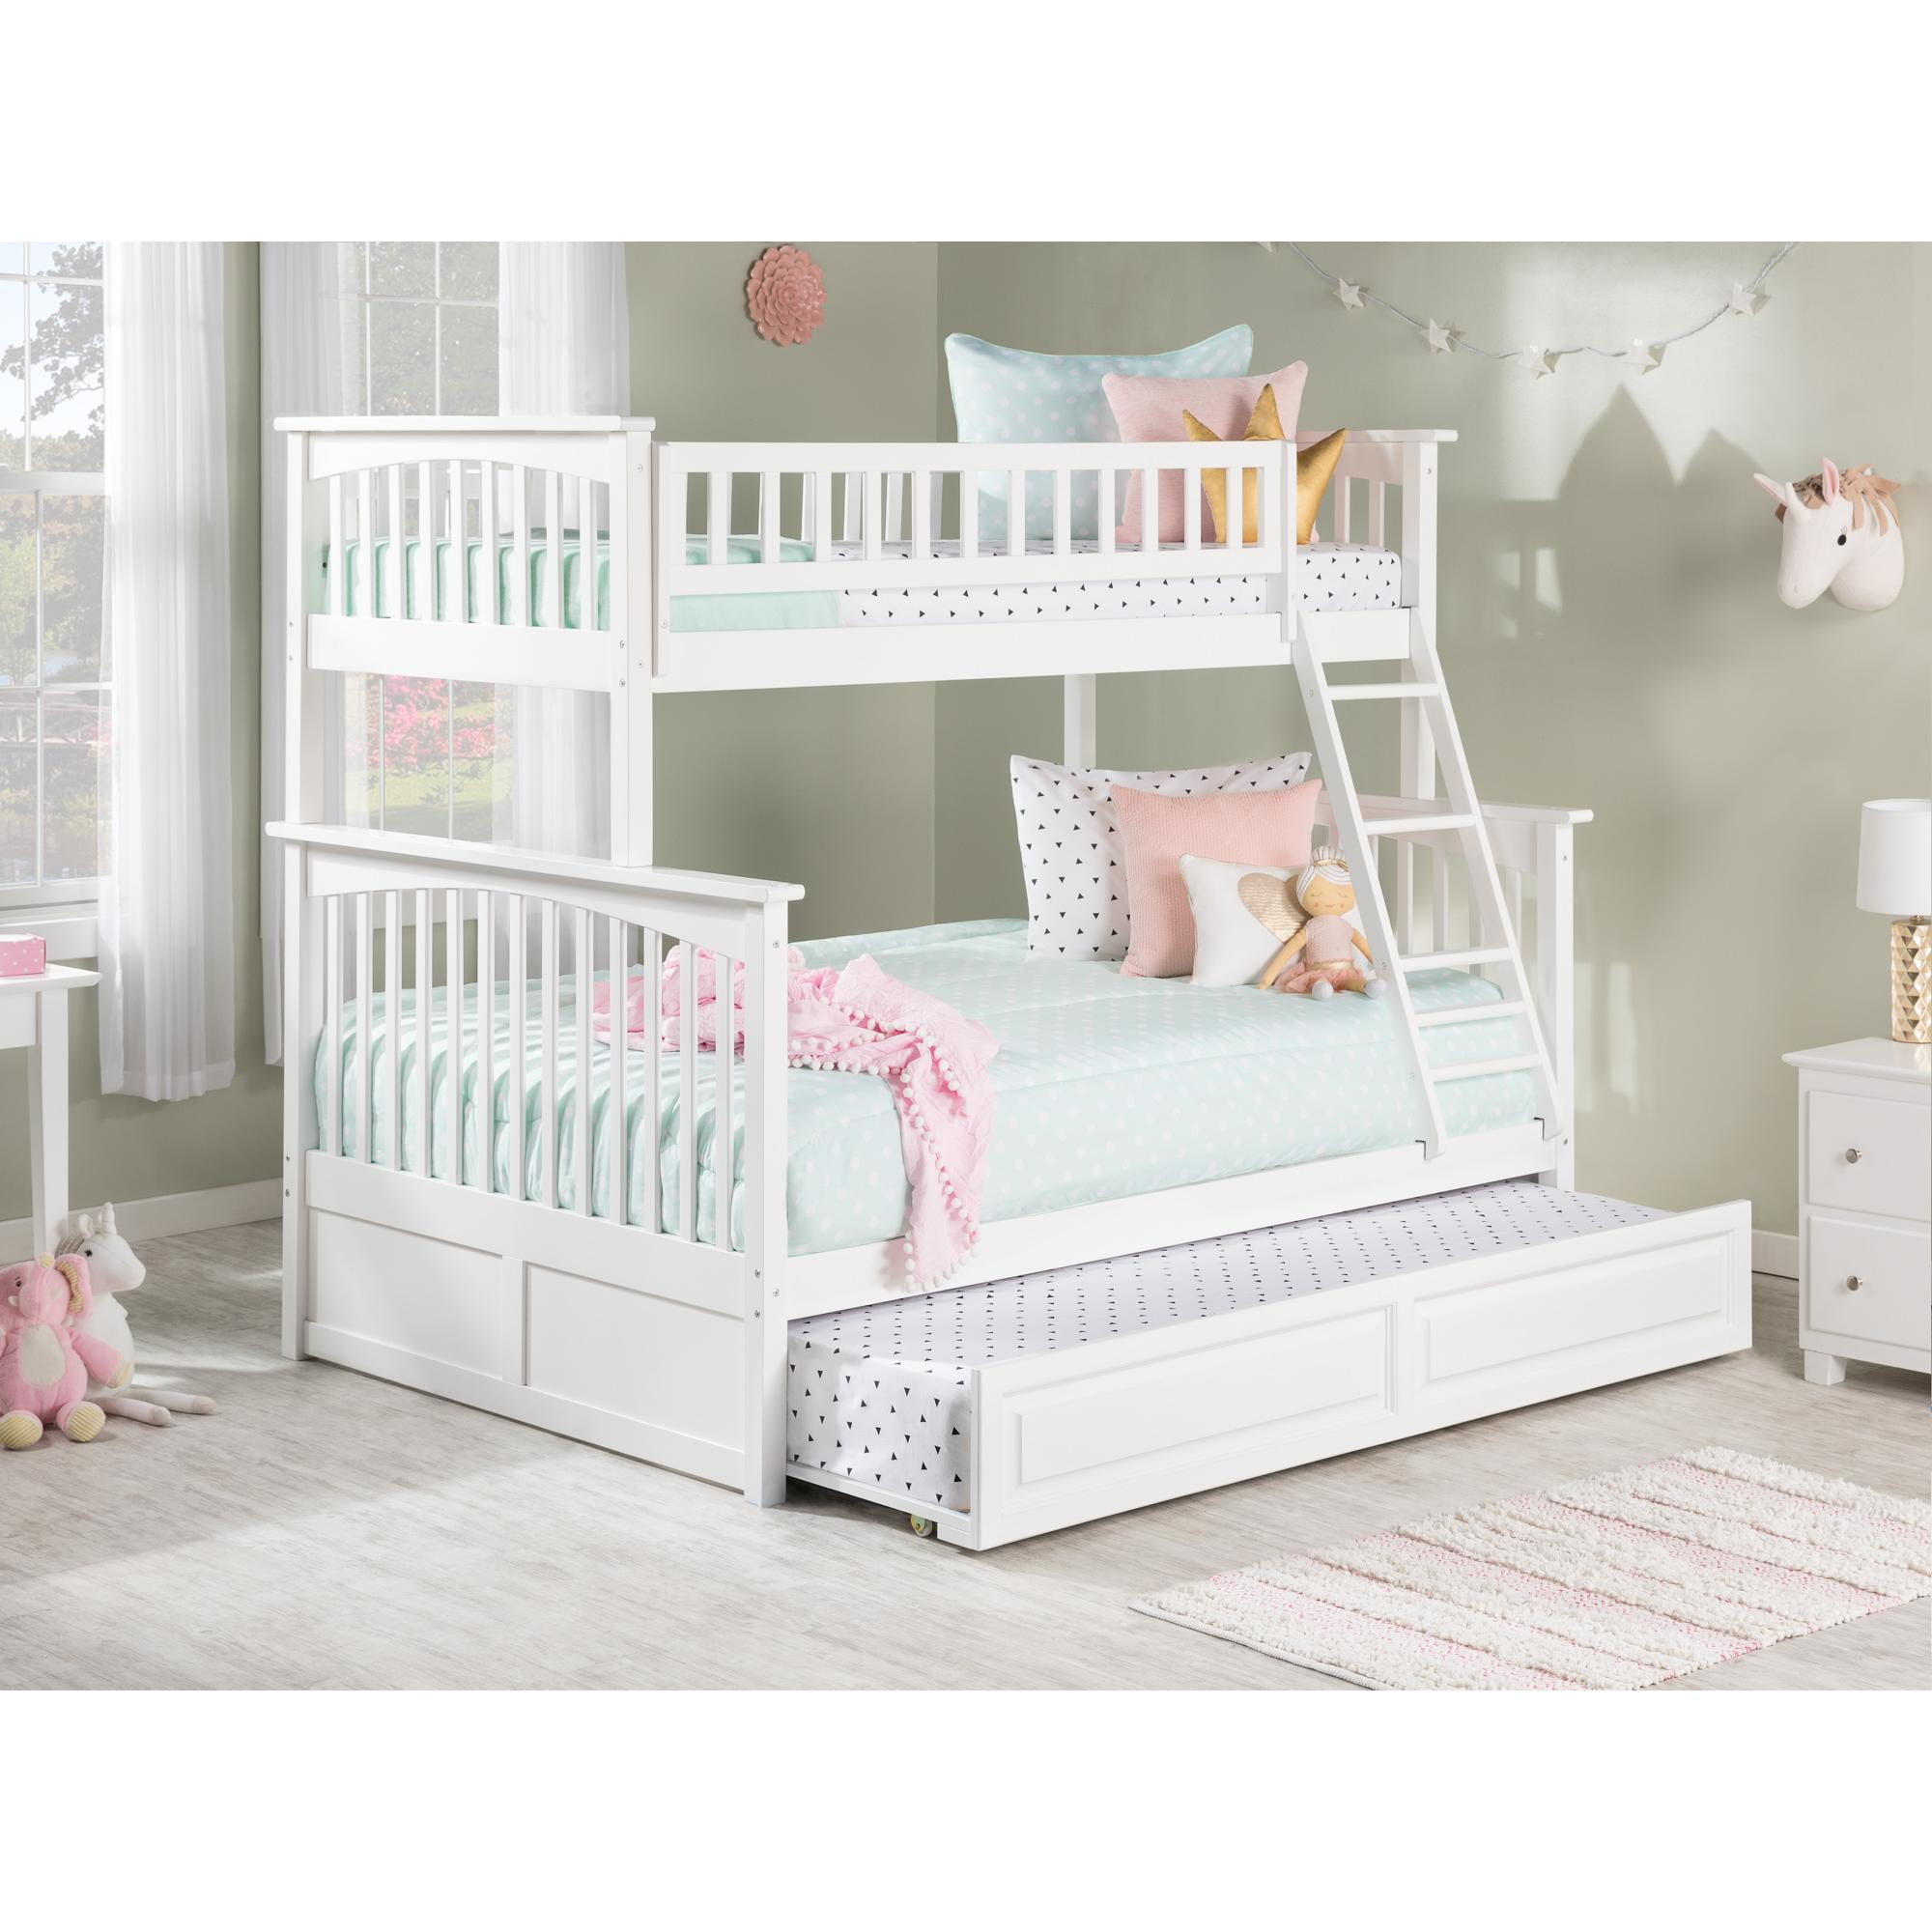 Ab55232 Columbia Bunkbed With Raised Panel Trundle Bed, Twin Over Full Size - White